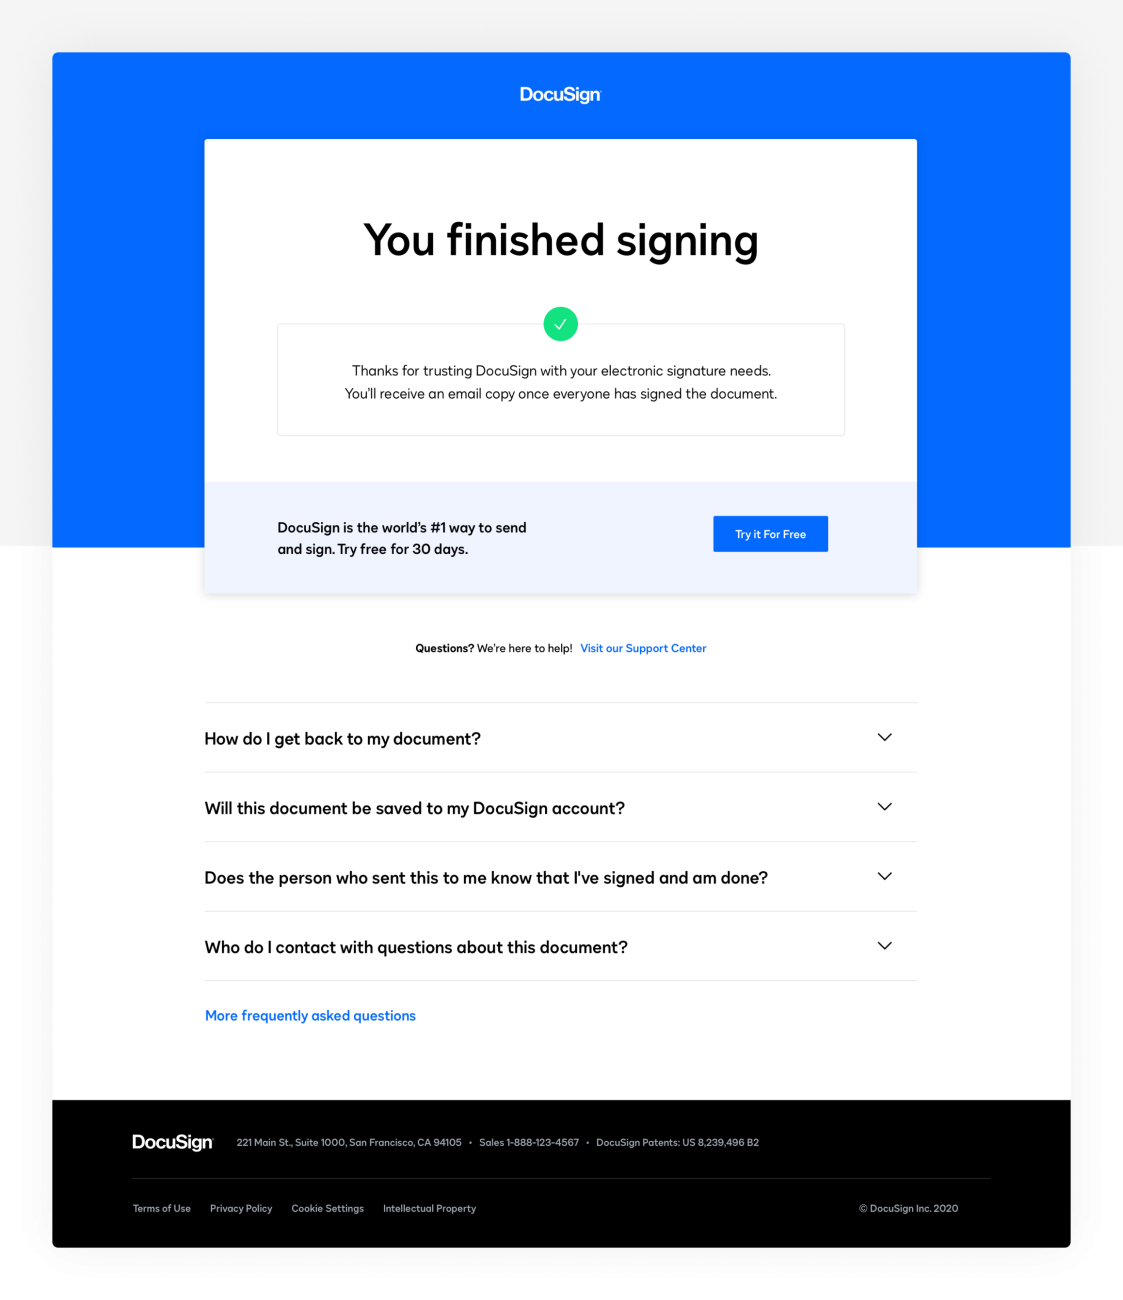 DocuSign post-sign landing page mockup that says, "You finished signing," and includes FAQs and a button to sign up for free.